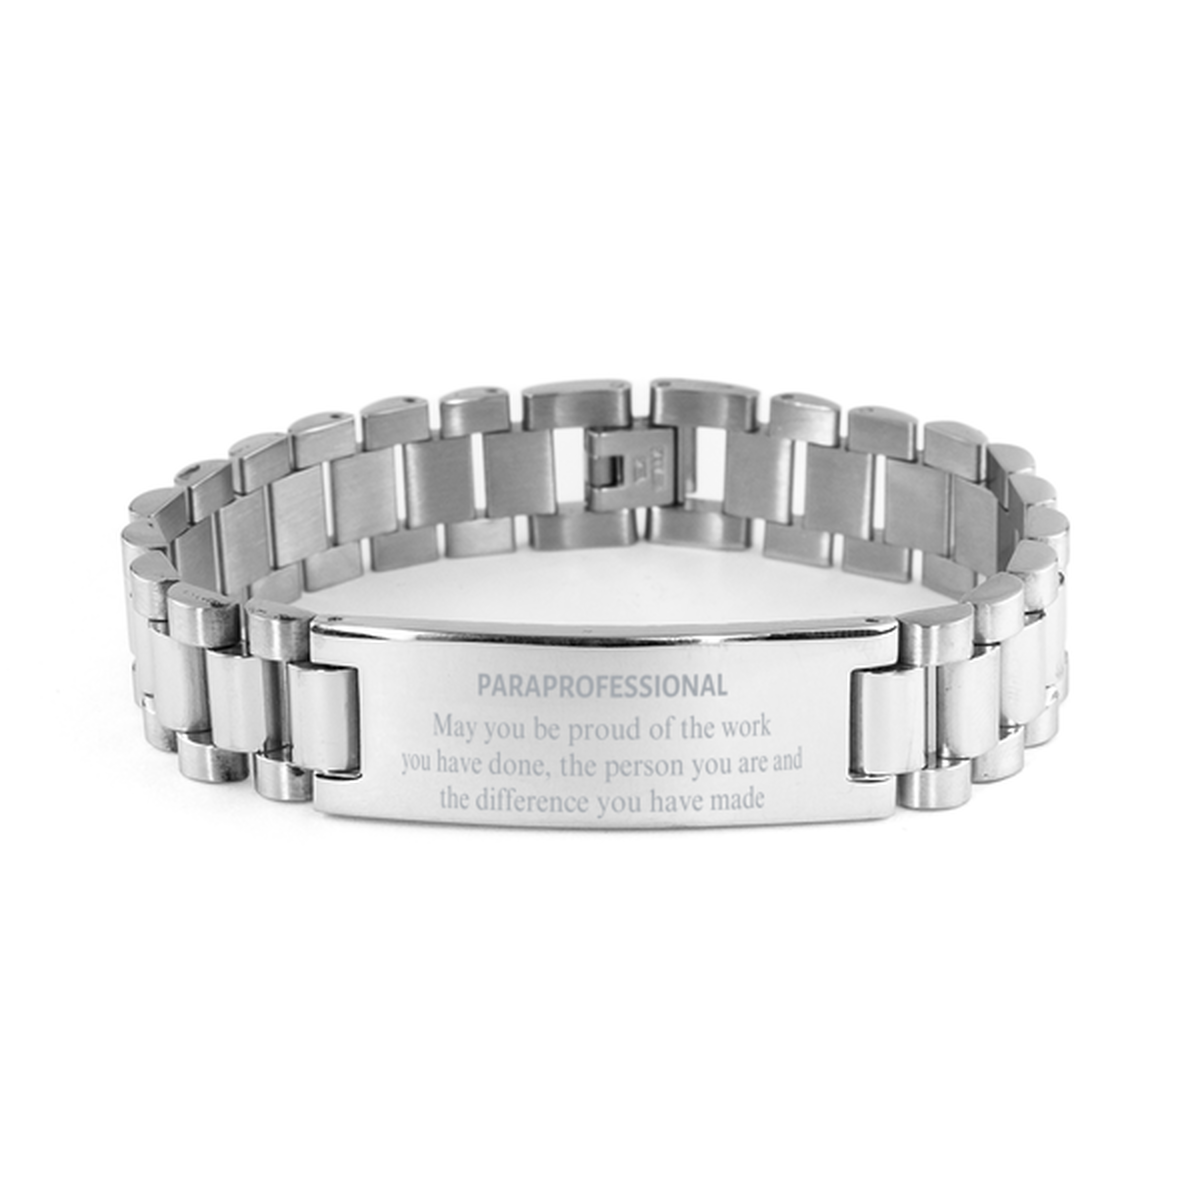 Paraprofessional May you be proud of the work you have done, Retirement Paraprofessional Ladder Stainless Steel Bracelet for Colleague Appreciation Gifts Amazing for Paraprofessional